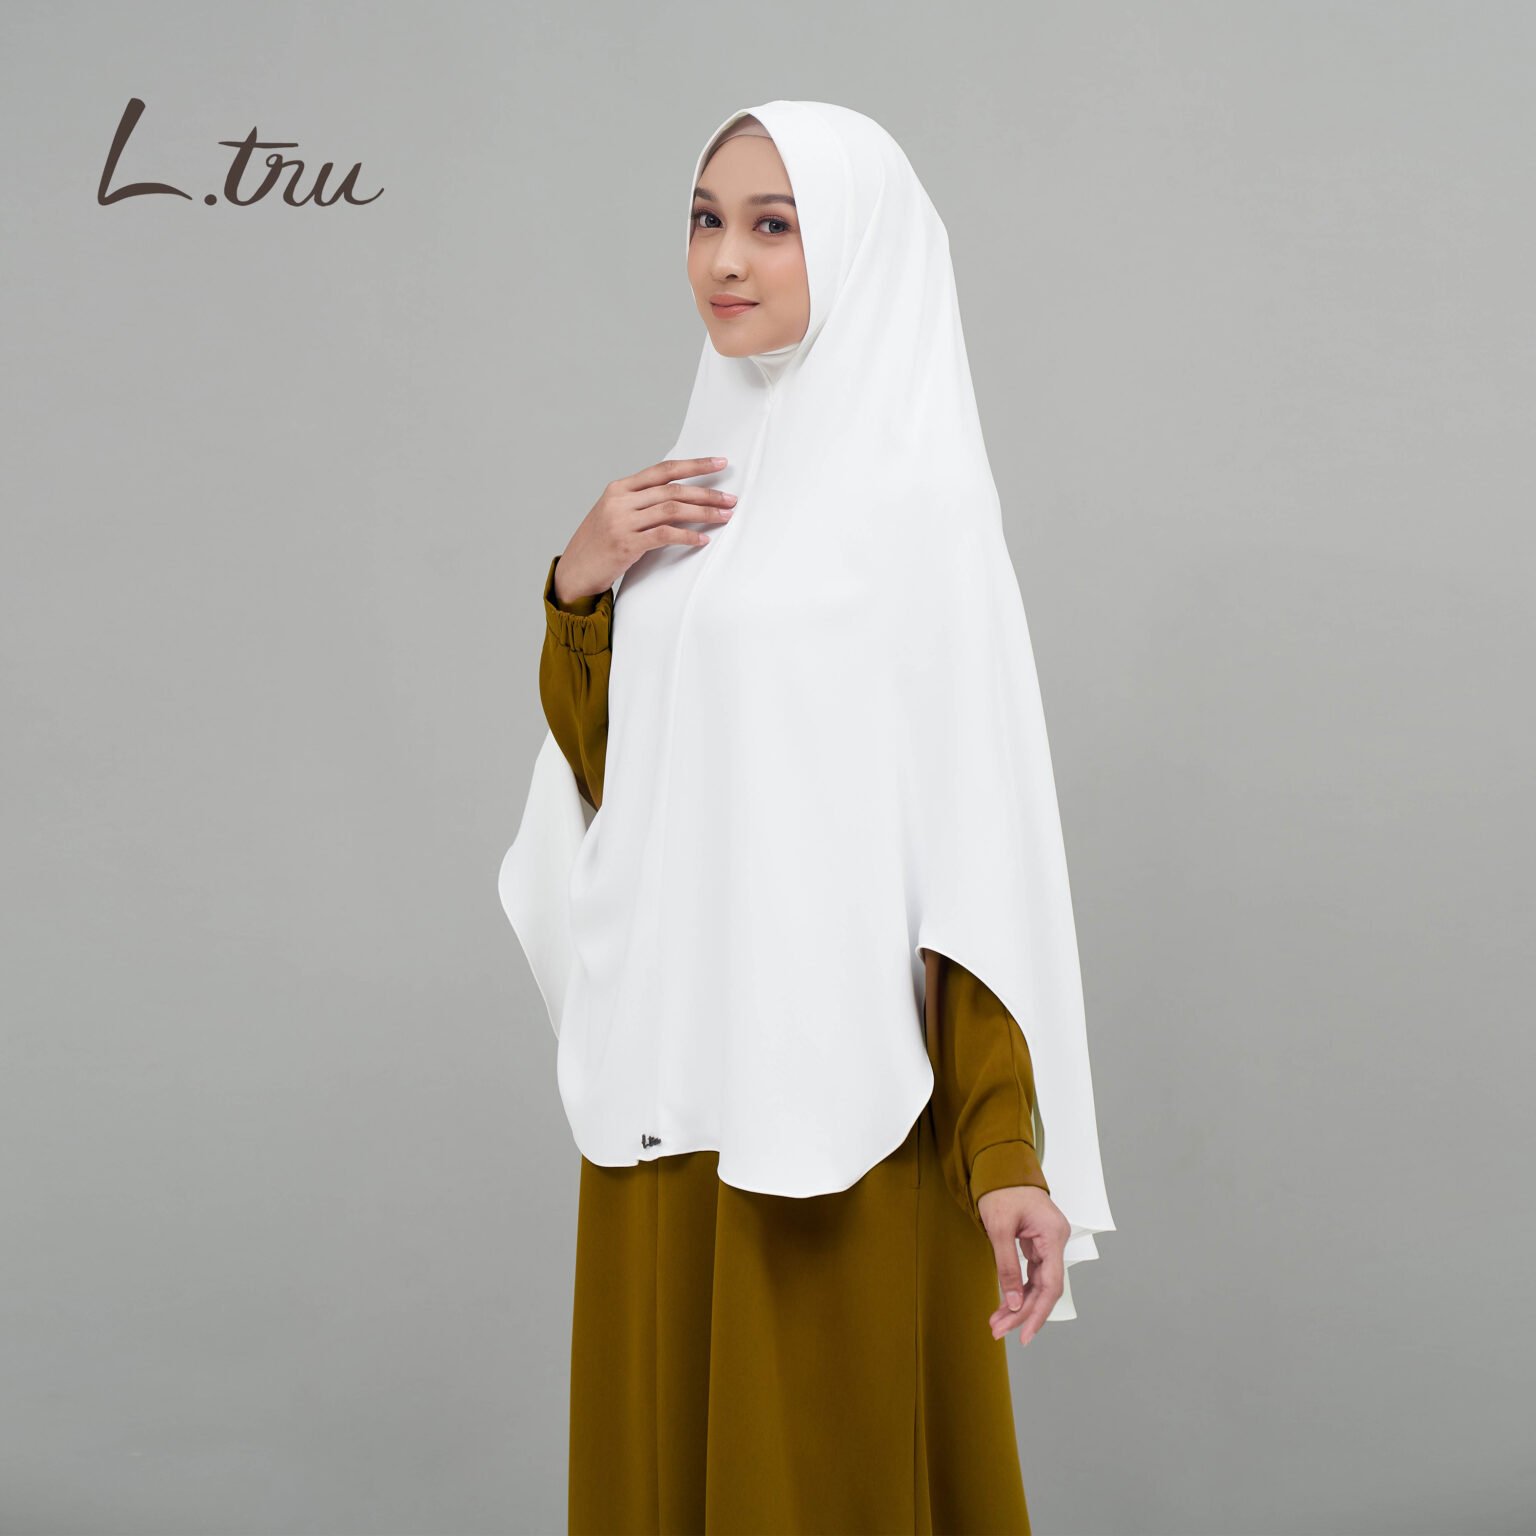 L.tru – Bergo Panjang Side Curved With Soft Pad